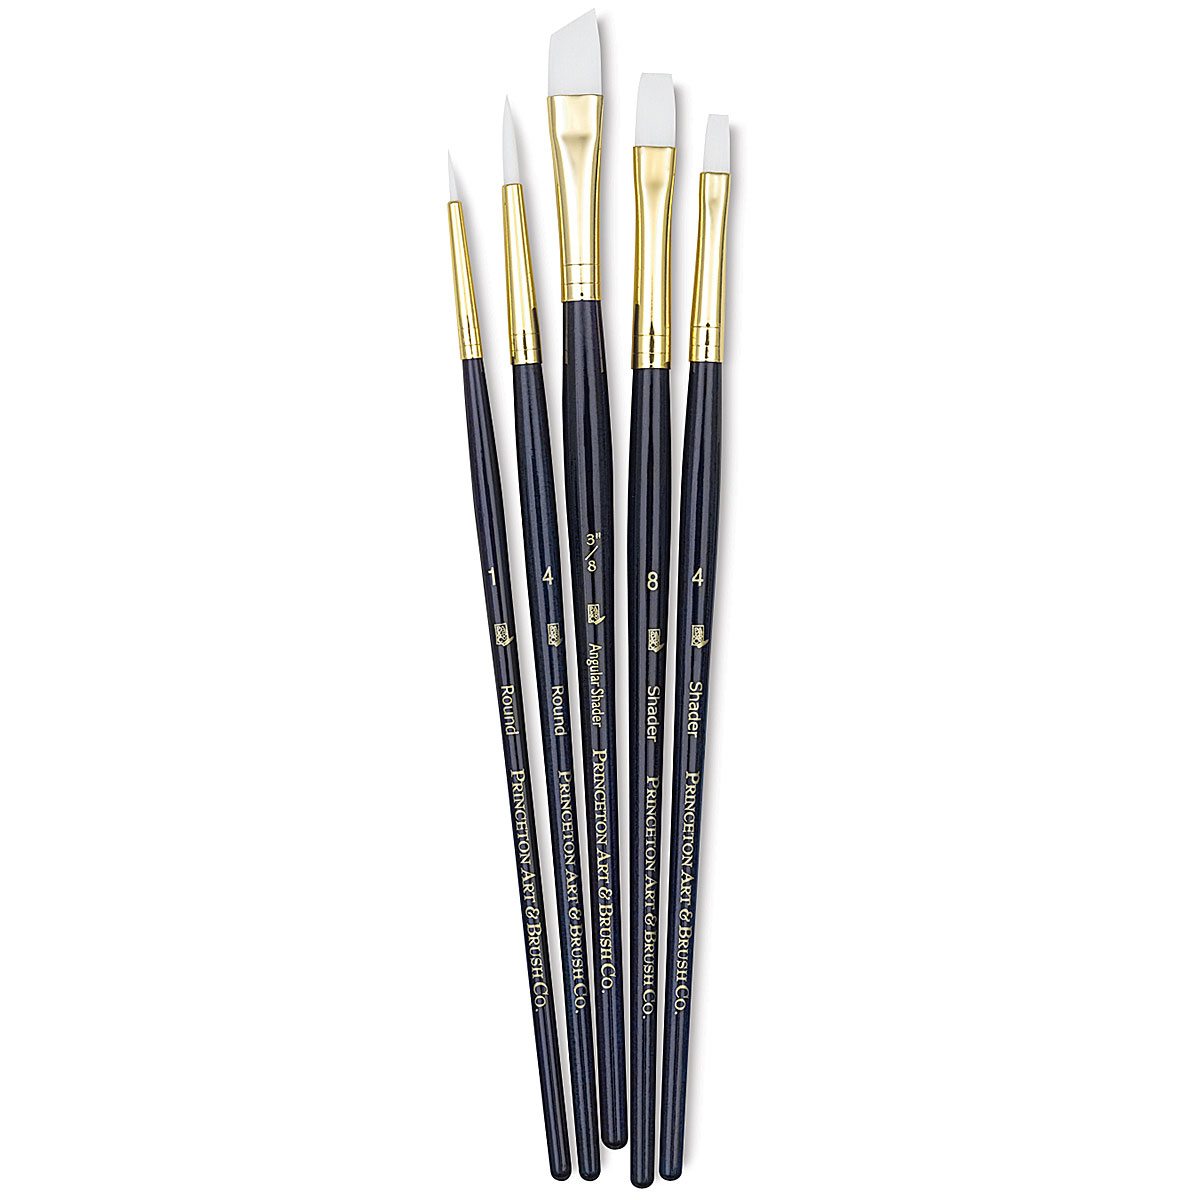 Princeton Real Value, Series 9100, Paint Brush Sets for Acrylic, Oil &  Watercolor Painting, Natural-Bristle (Rnd 6, Flb 4, Brt 8, Flat 12)